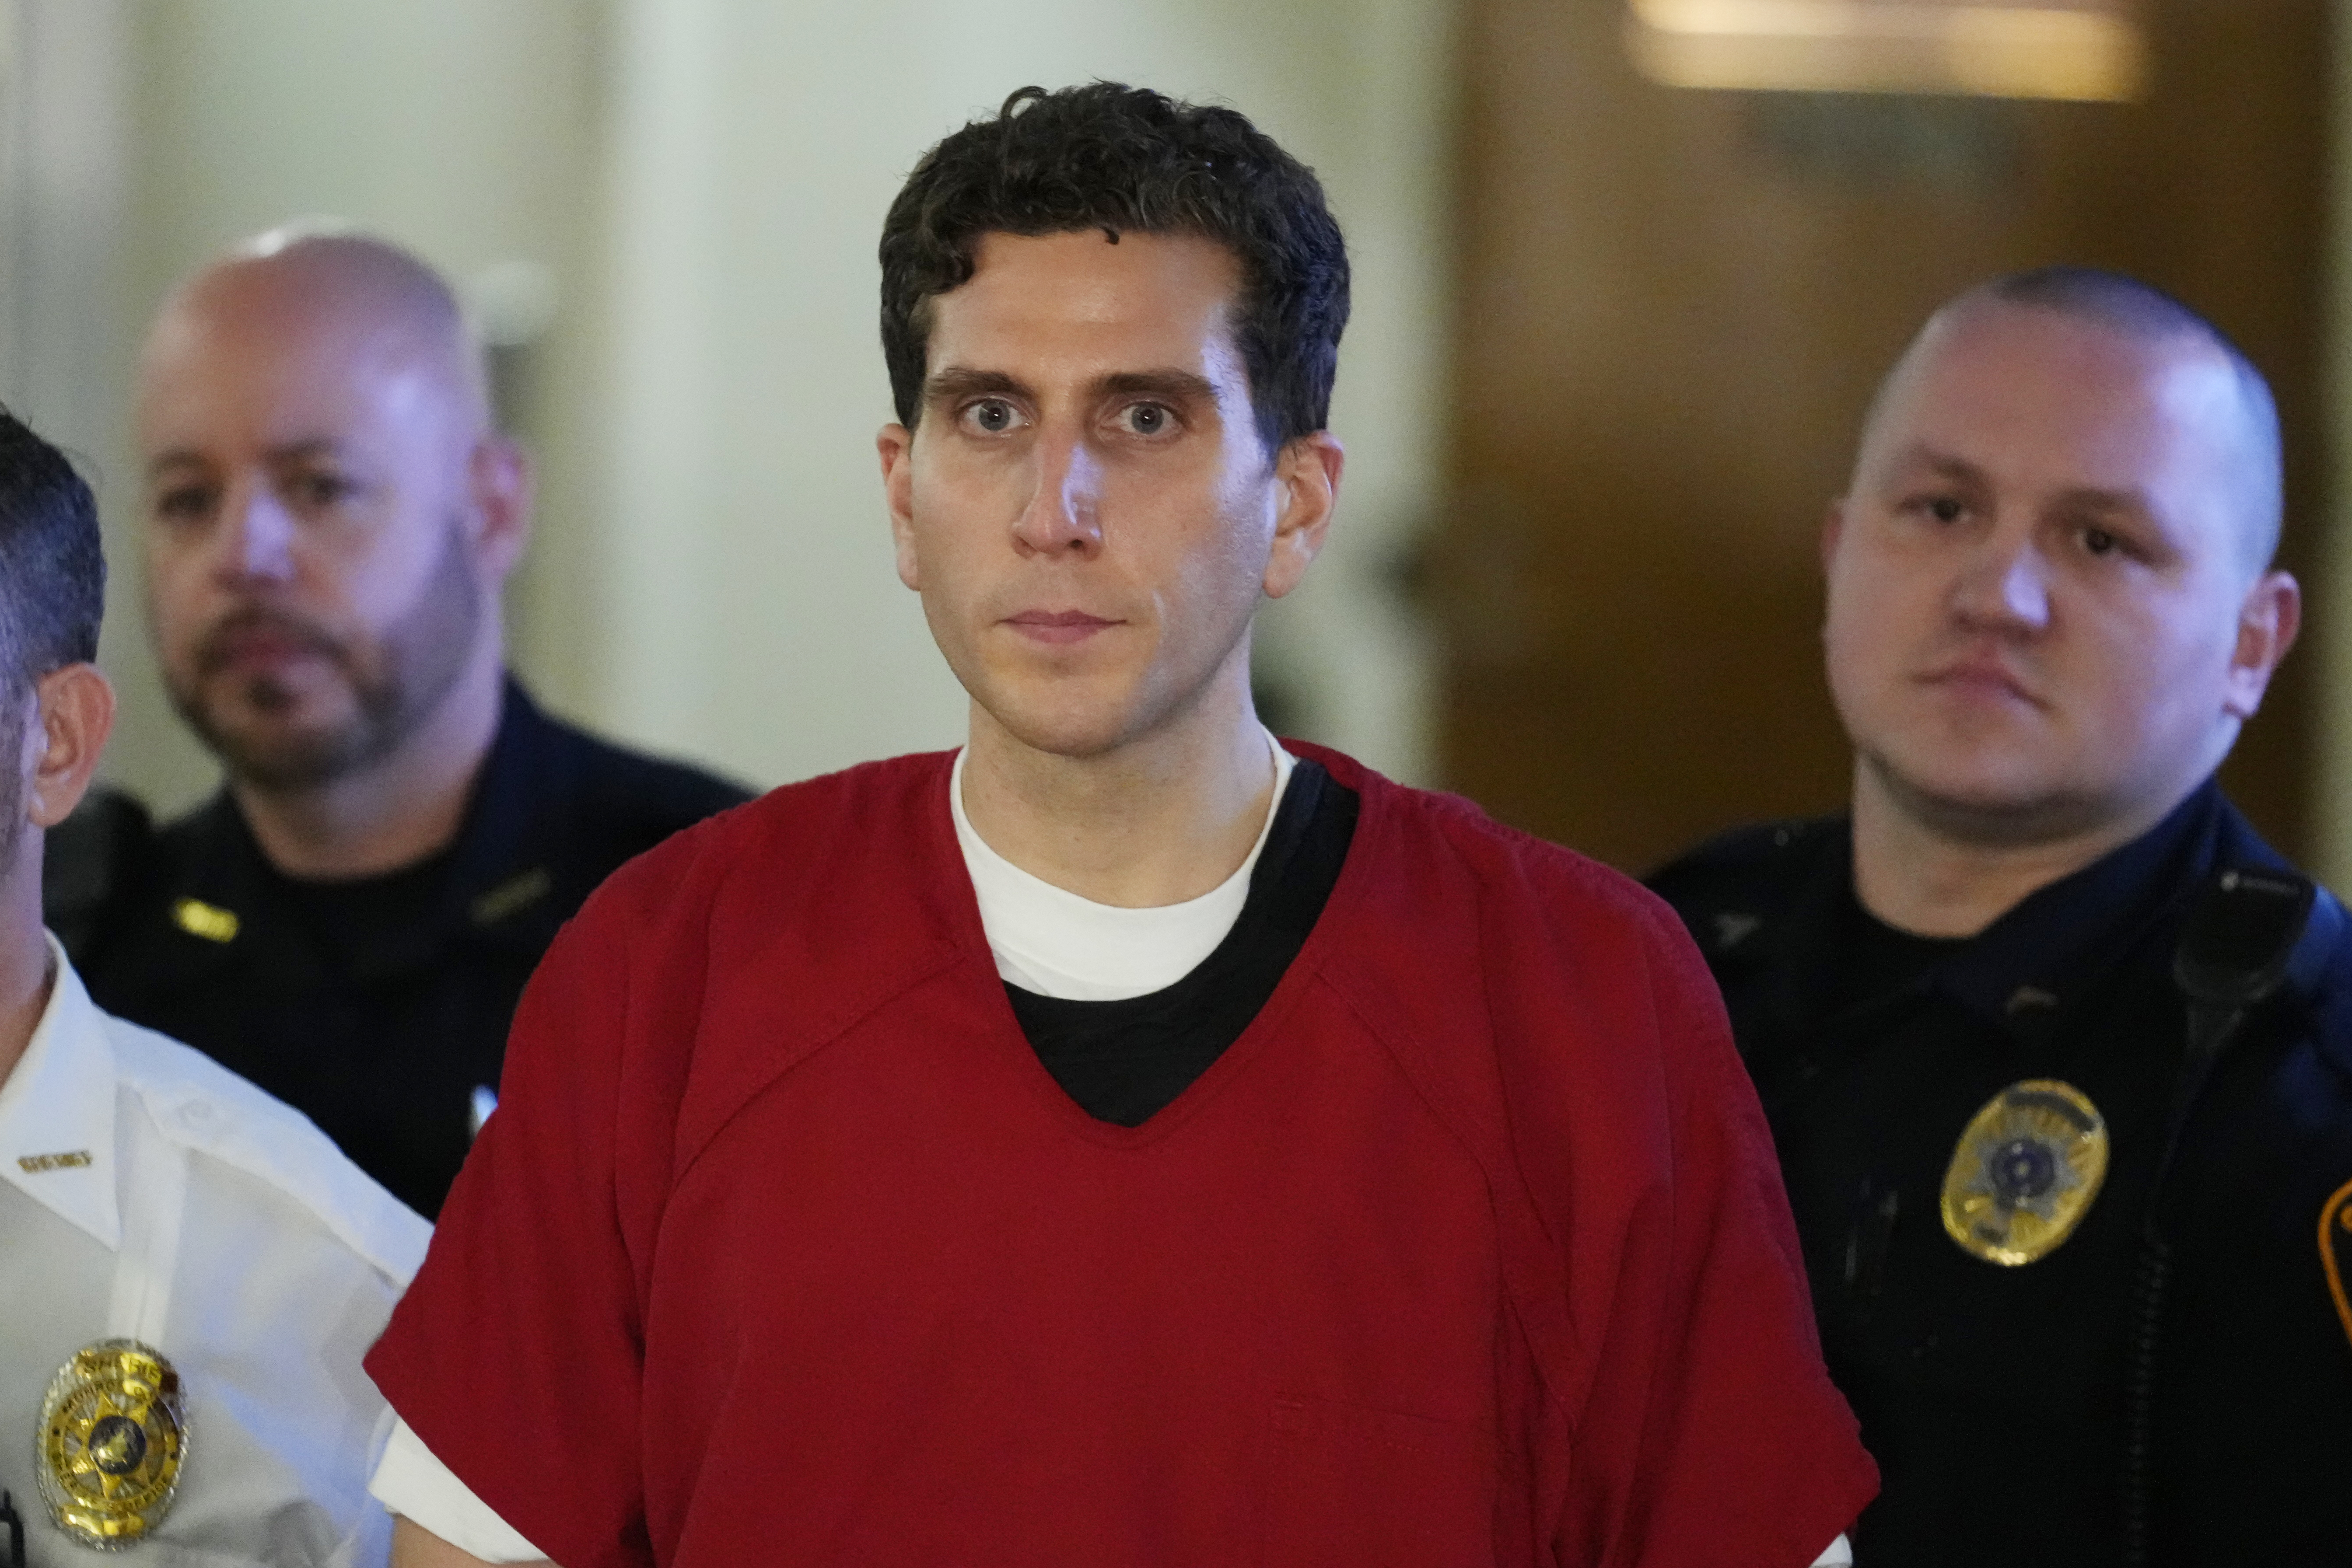 Bryan Kohberger, who is accused of killing four University of Idaho students, is escorted to an extradition hearing at the Monroe County Courthouse in Stroudsburg, Pa., Jan. 3, 2023.